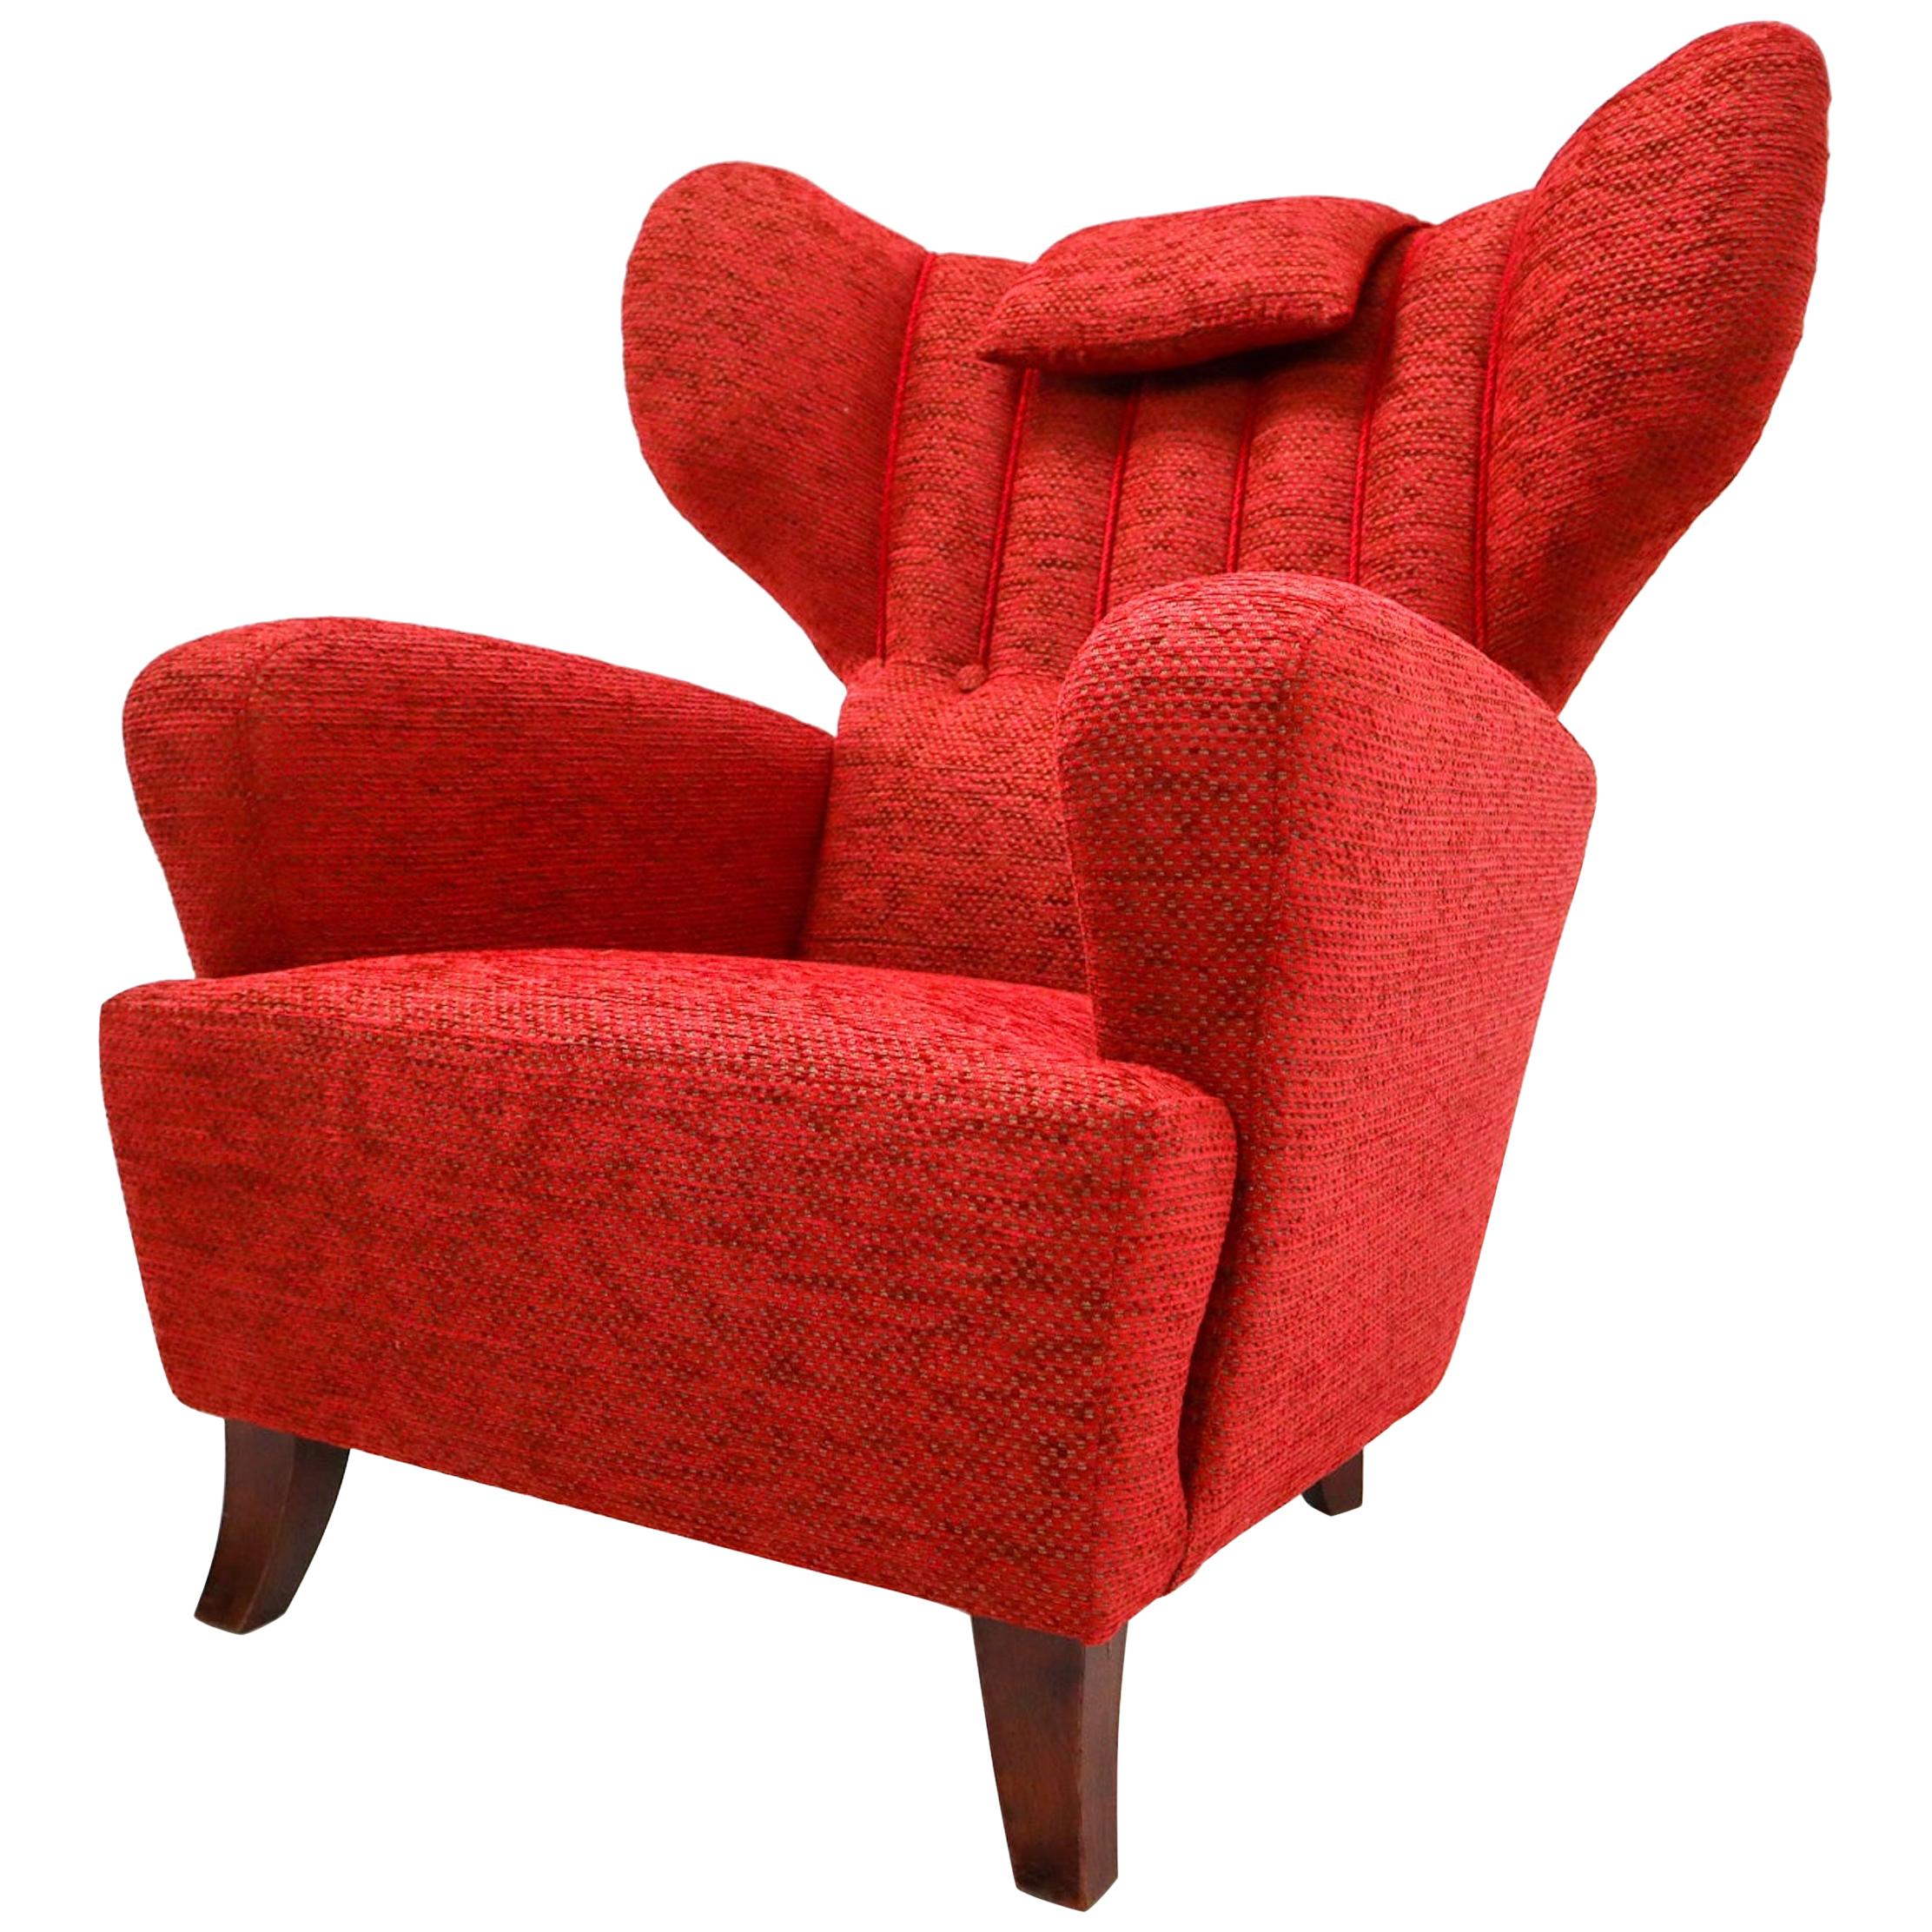 Mid-20th Century Red Reupholstered Wingback Chair, Austria, 1930s